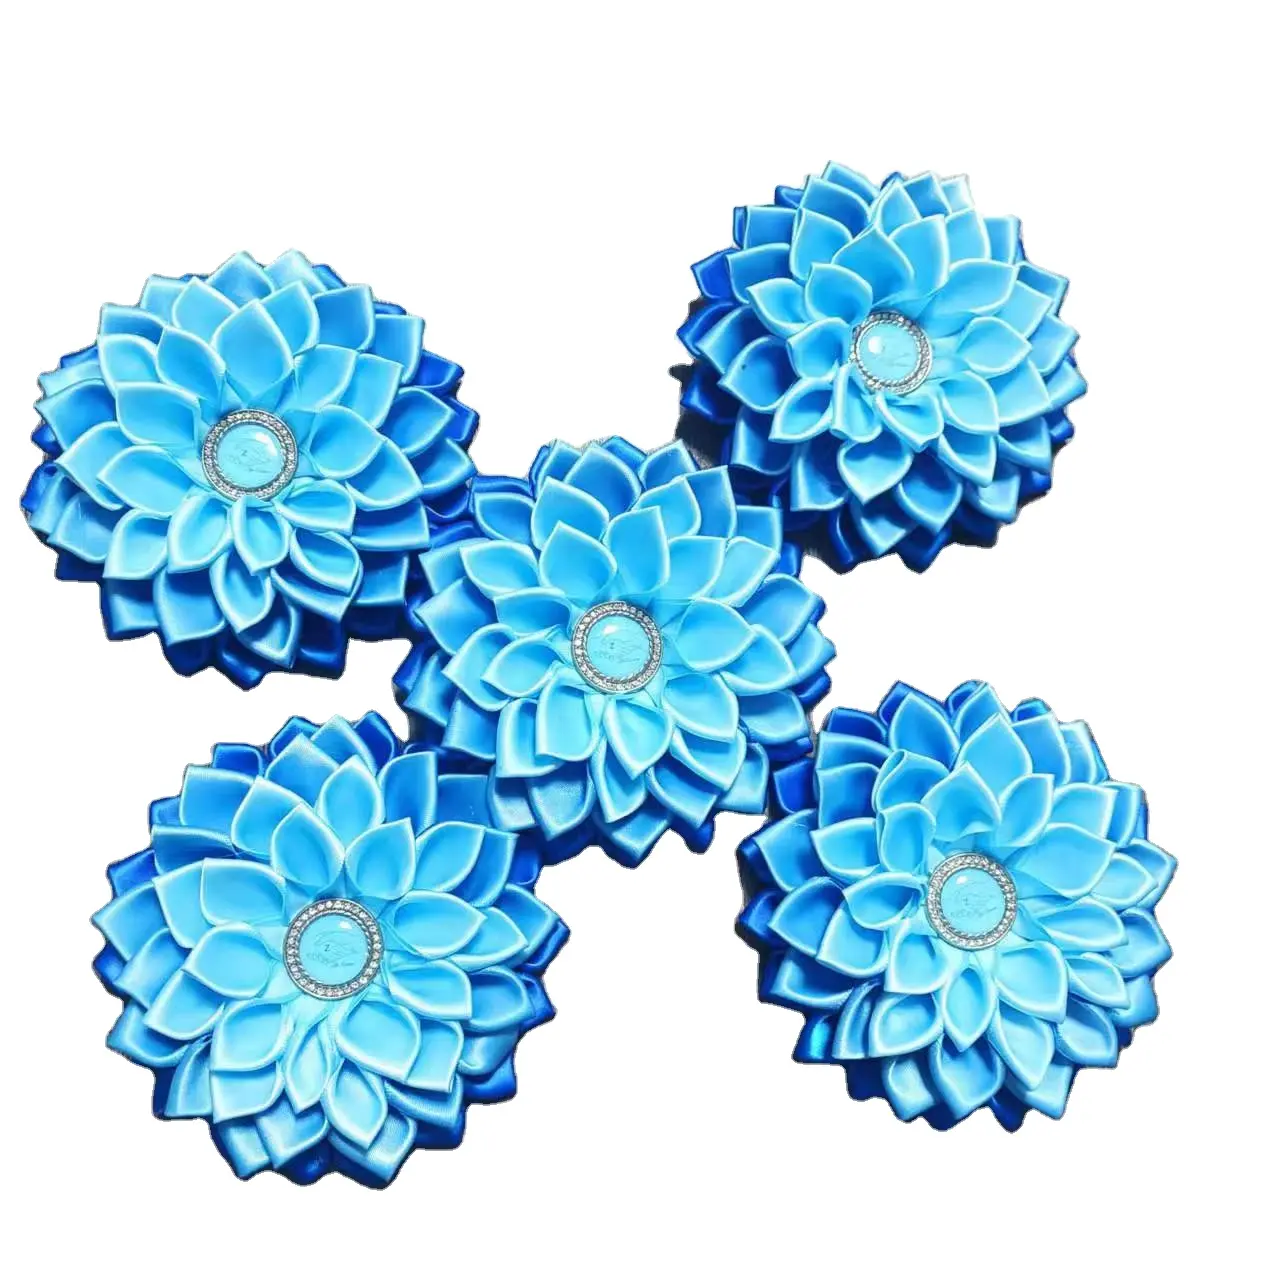 Wholesales 4.5 inches Zeta Amicae Ribbon Flower Corsage Light Blue and Royal Blue Variant Color ZA 1948 Brooch Pin